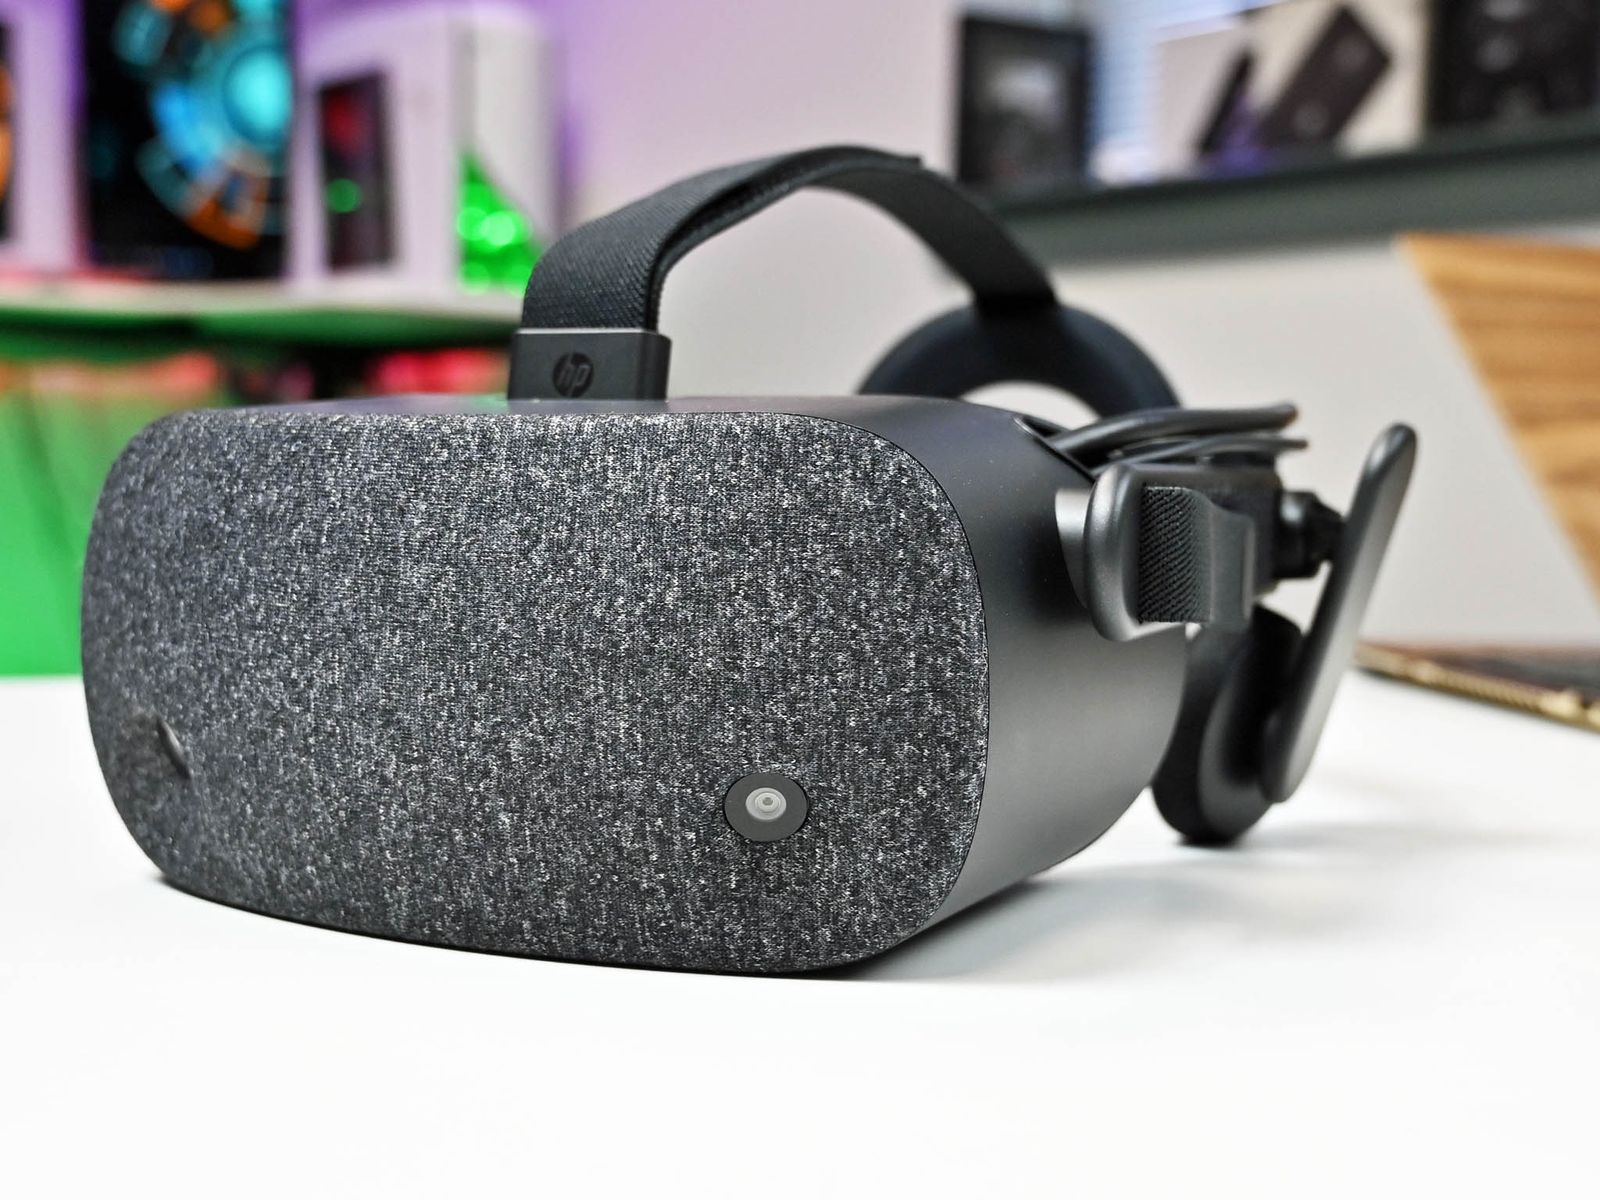 HP Reverb Windows Mixed Reality headset